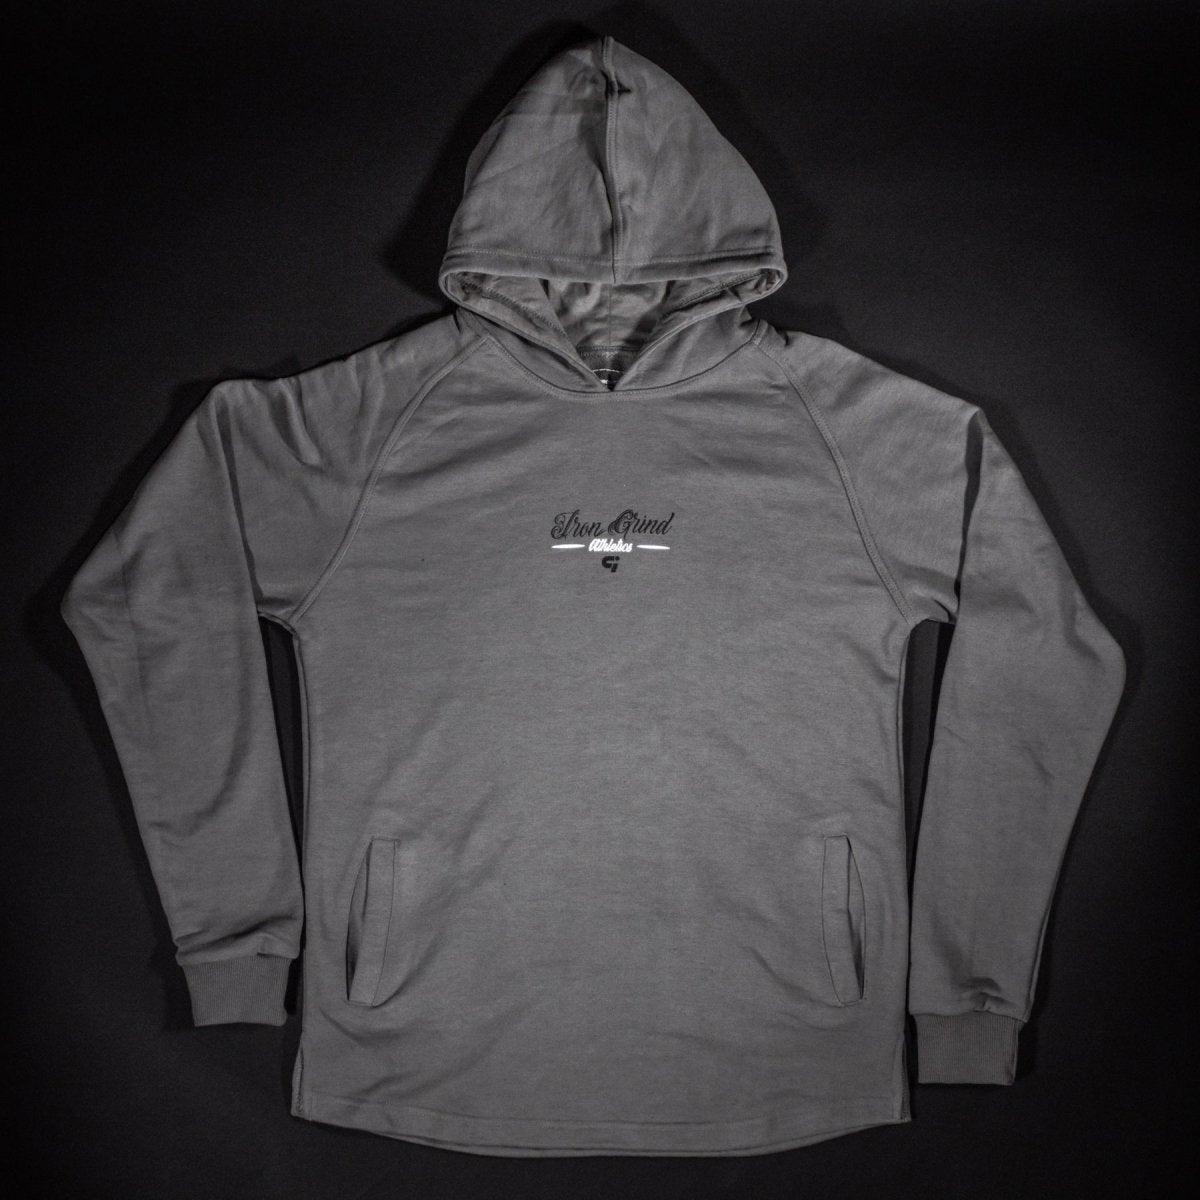 Versatility French Terry Hoodie - Ultimate Gray - IronGrind Athletics - activewear - gymshark - alphalete